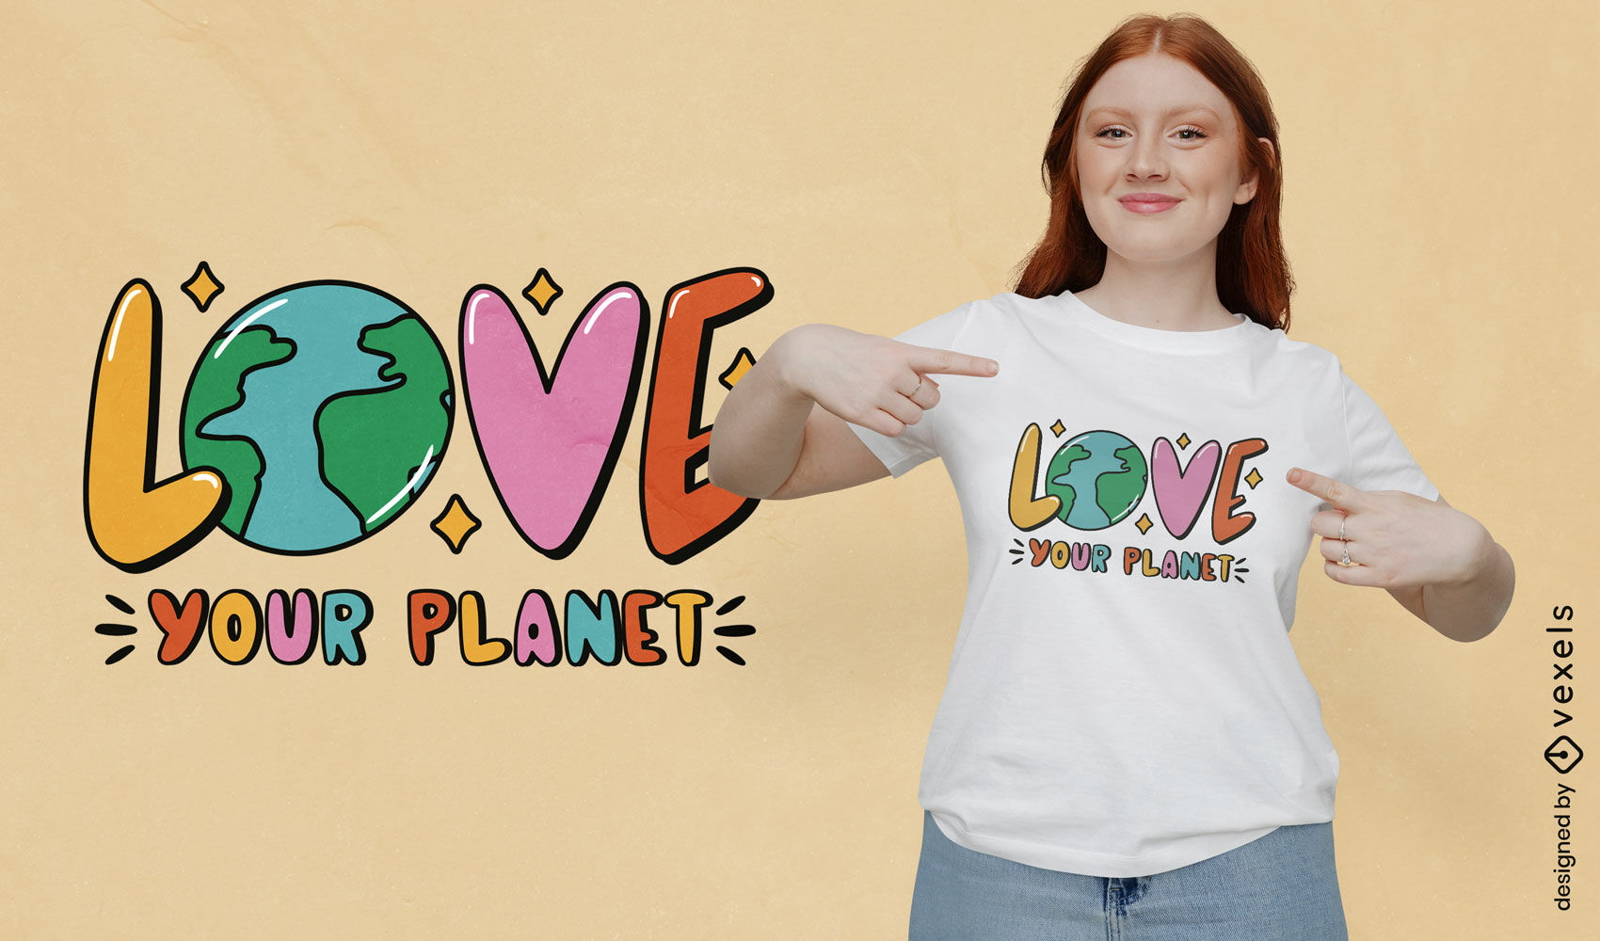 Love your planet quote t-shirt design